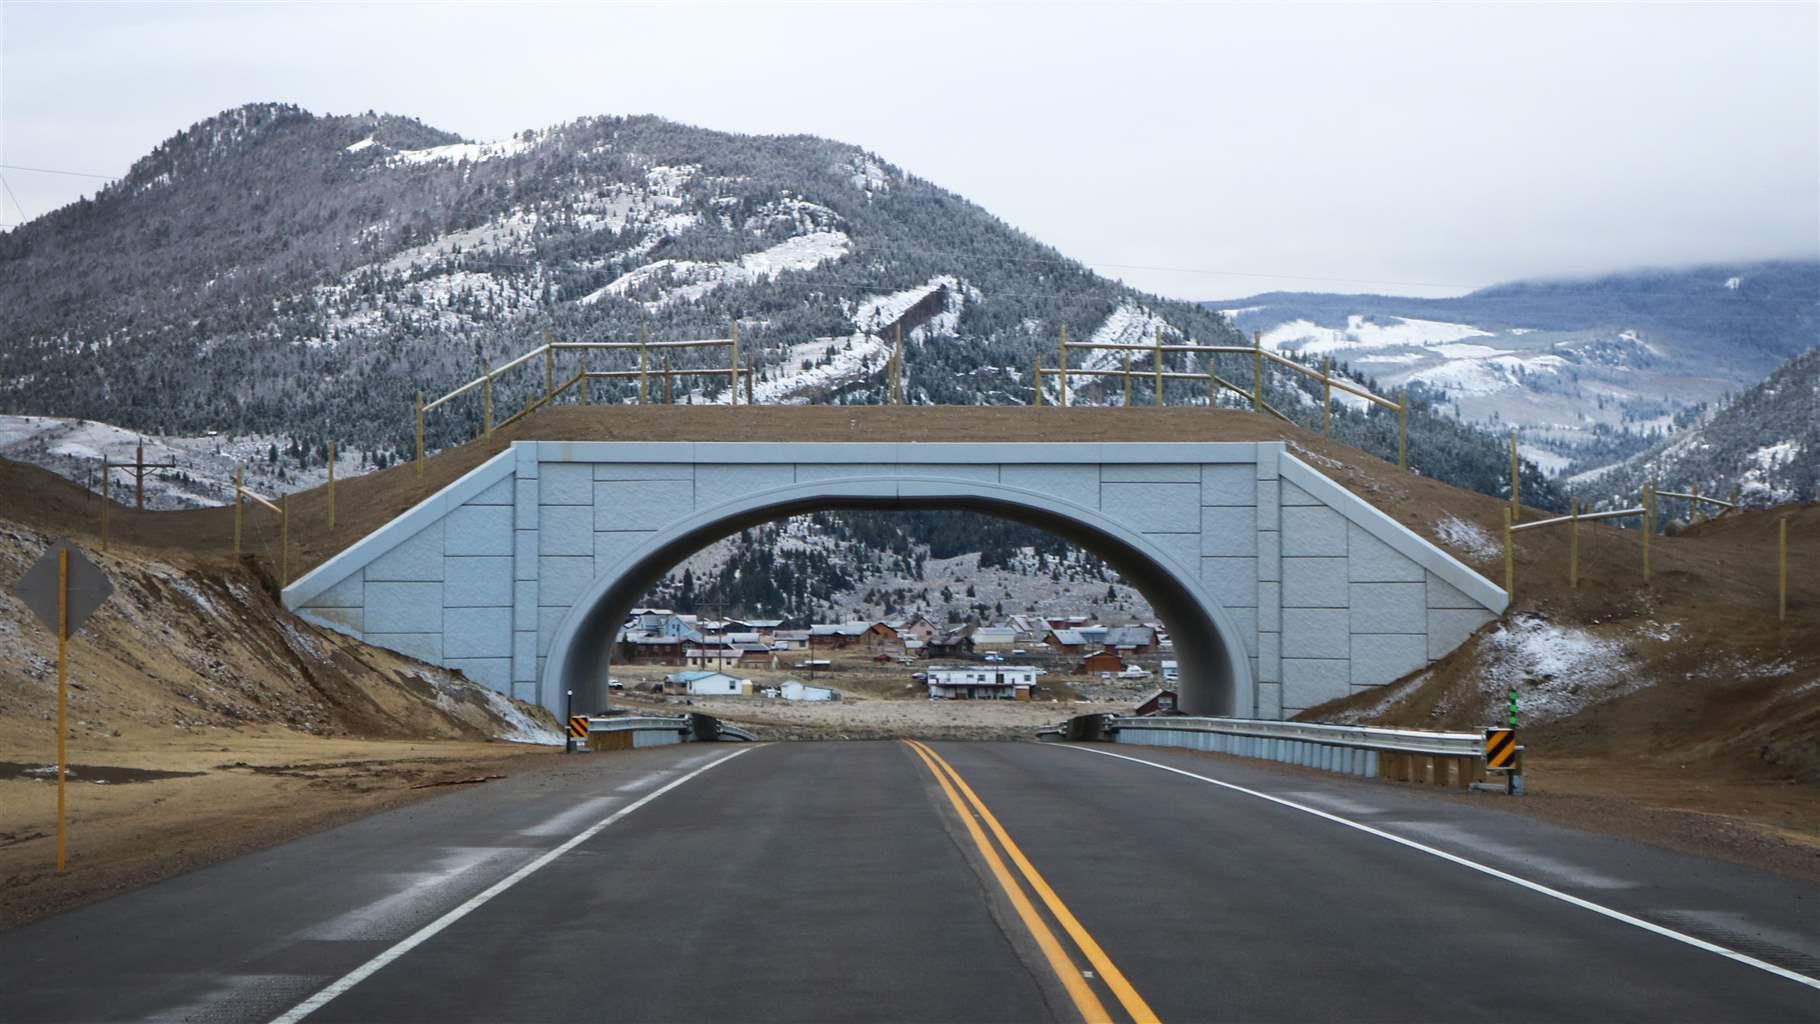 Driving in the Wild: Protecting Yourself and Wildlife - Creating dedicated wildlife crossings and corridors